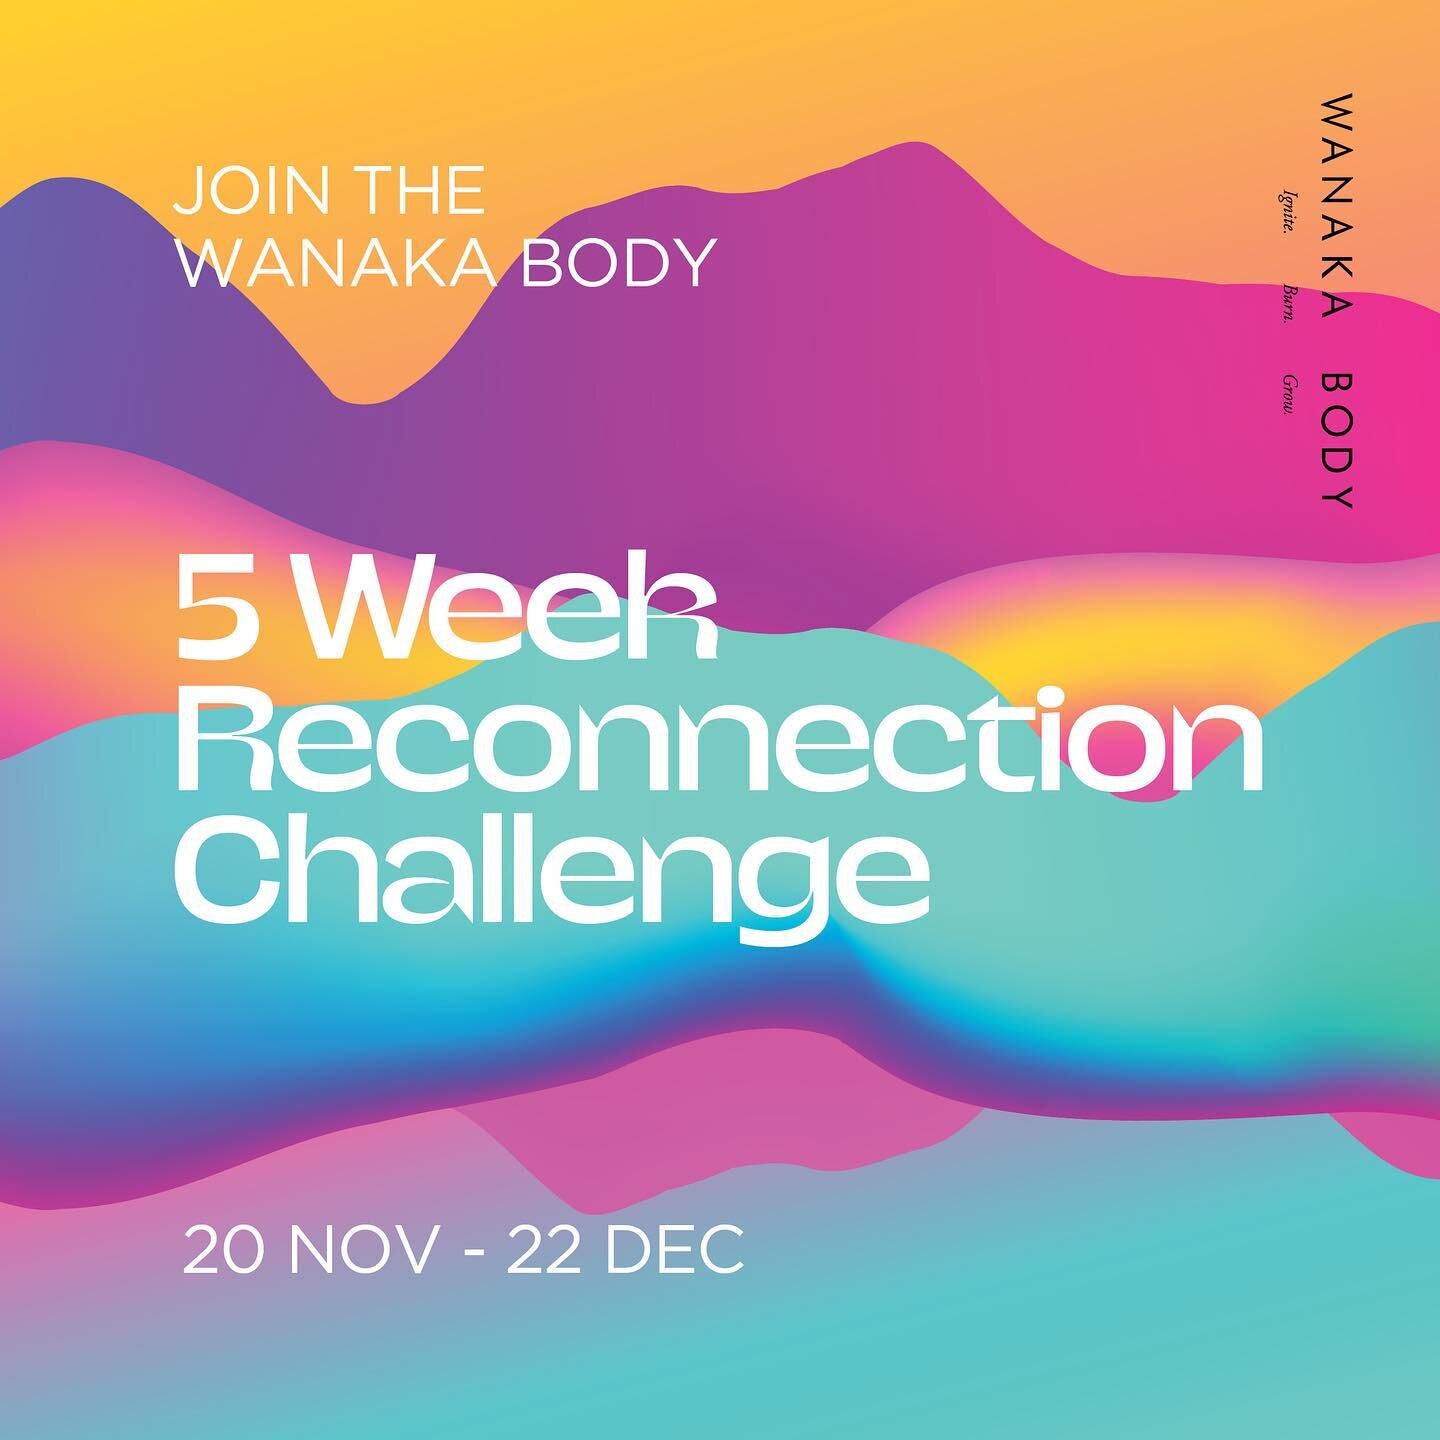 Very excited to announce a 5 Week Reconnection Challenge after a 7 month hiatus + much needed rest and reset.

Over the past 7 months of sleeping in, studying, learning, tuning in, listening to my body + creating space to get clarity on what path I w